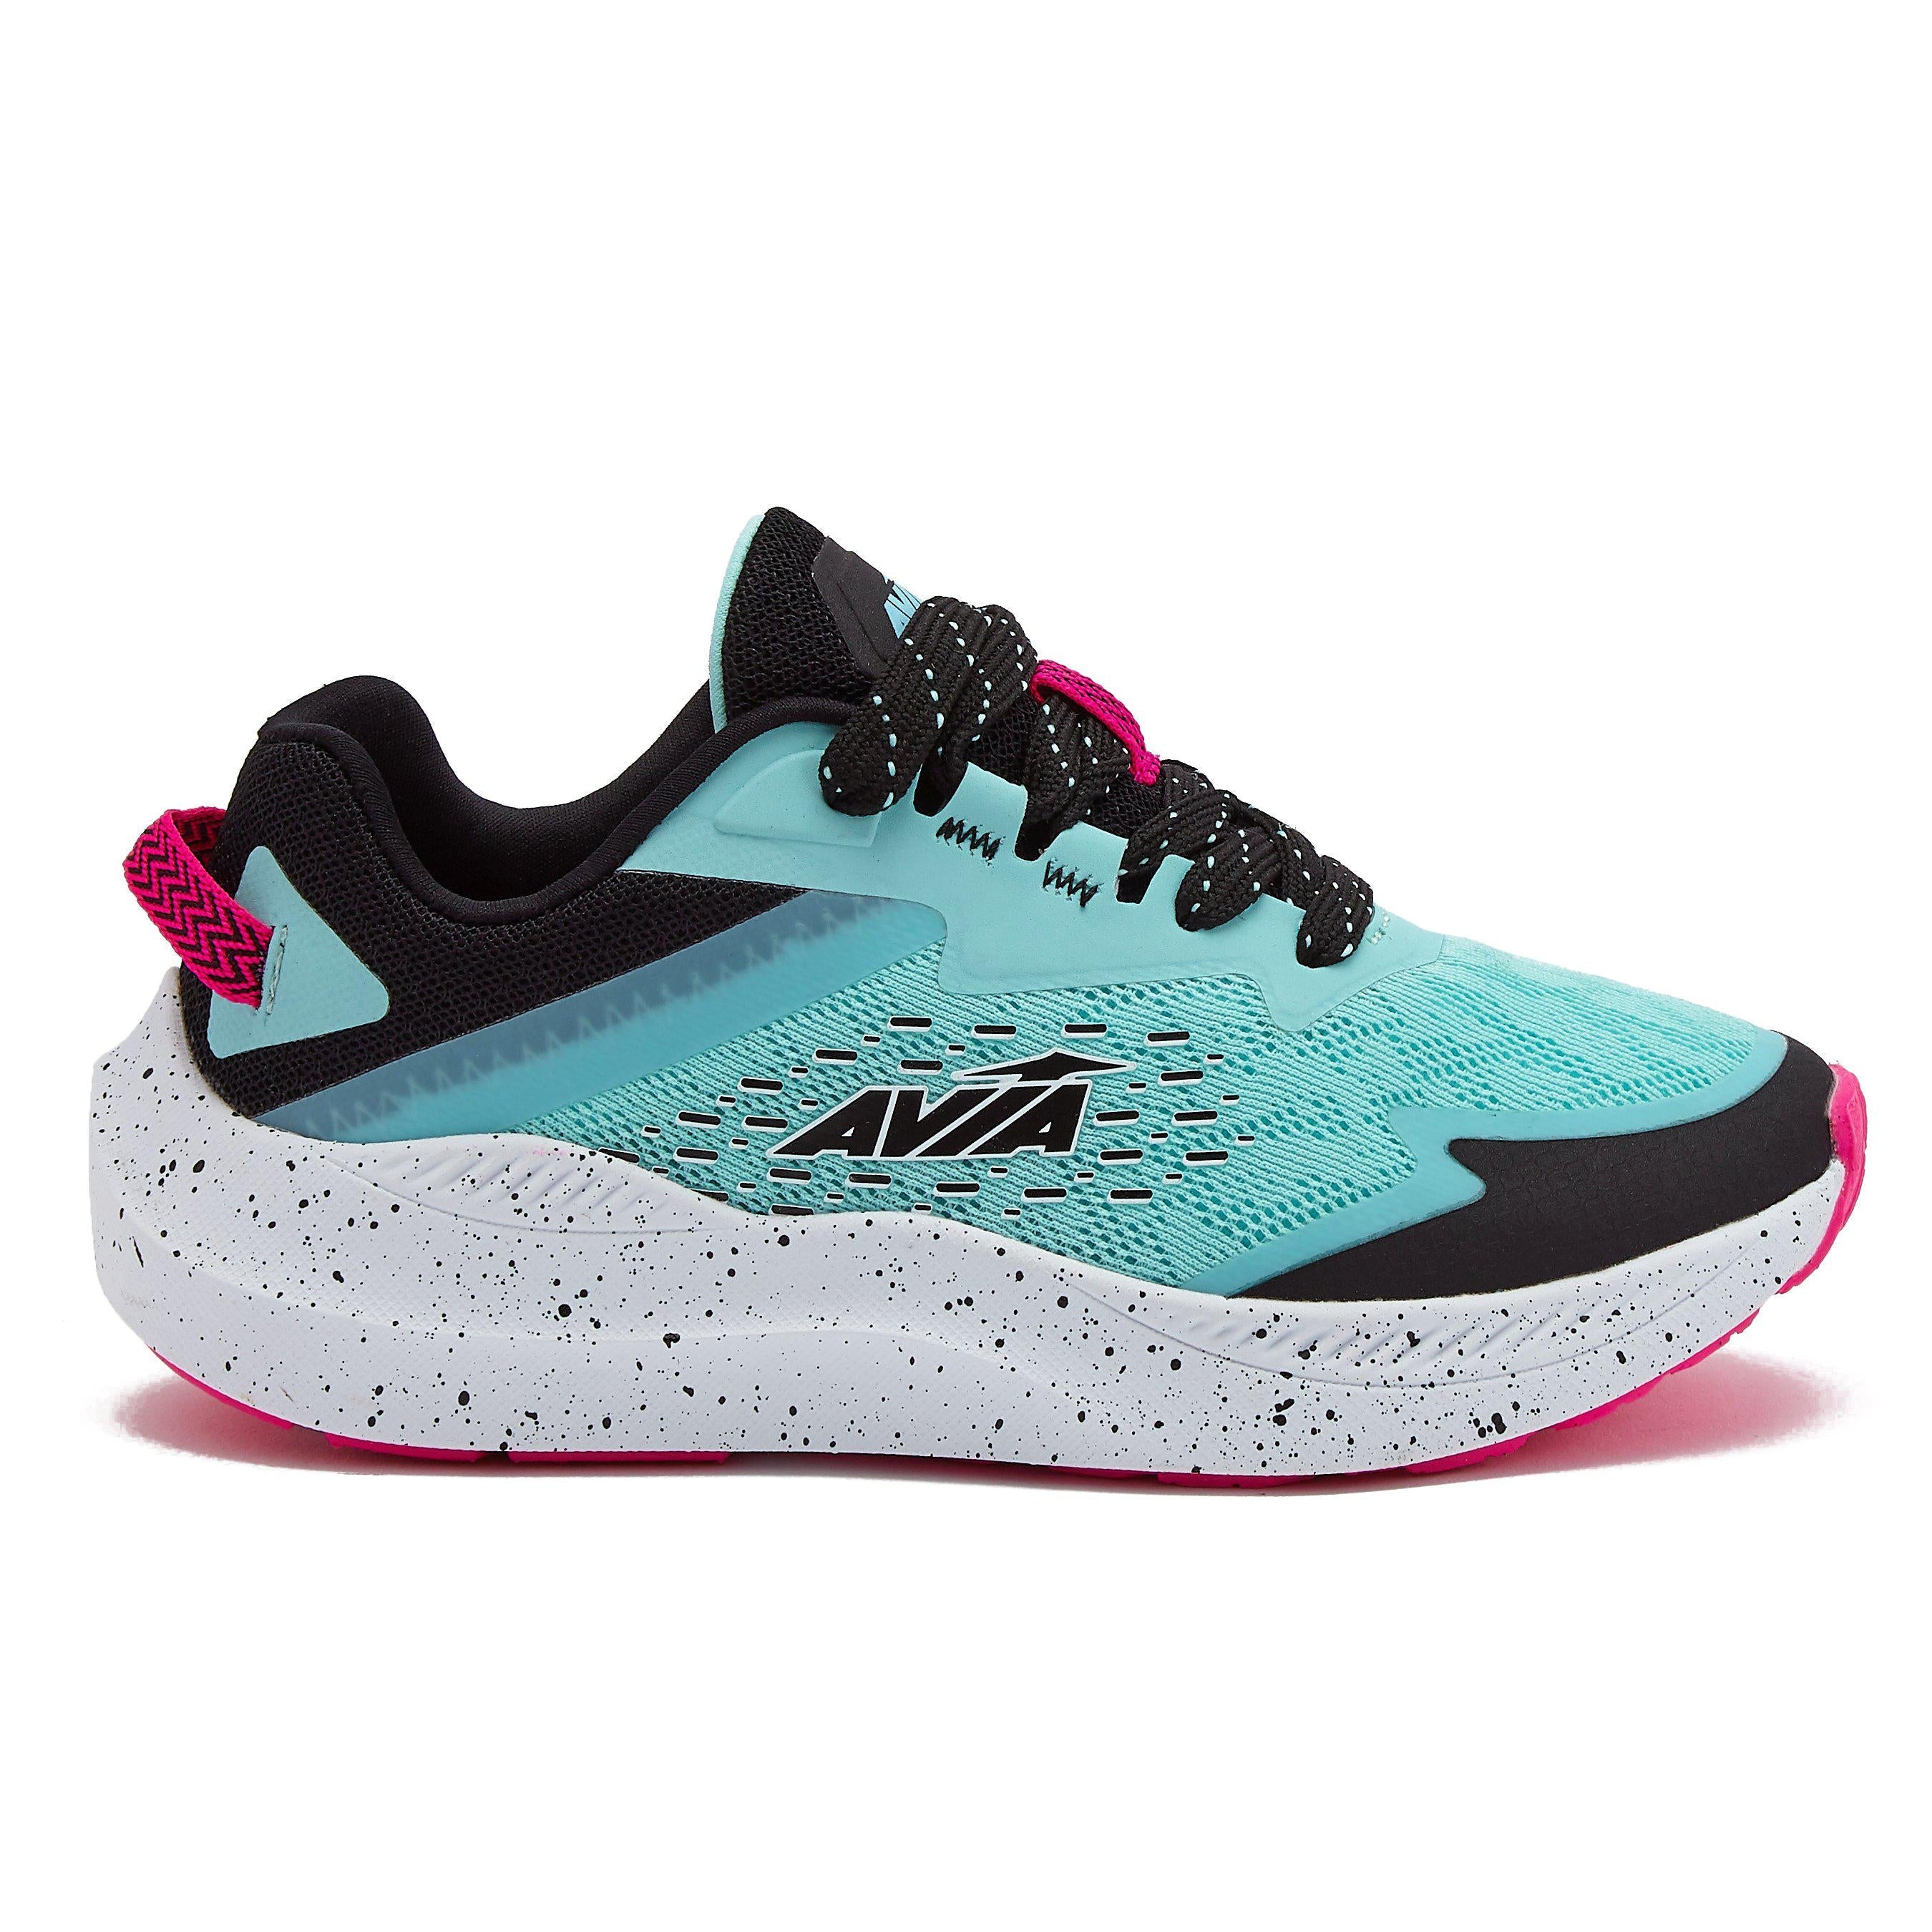 Best Deals for Avia Shoes